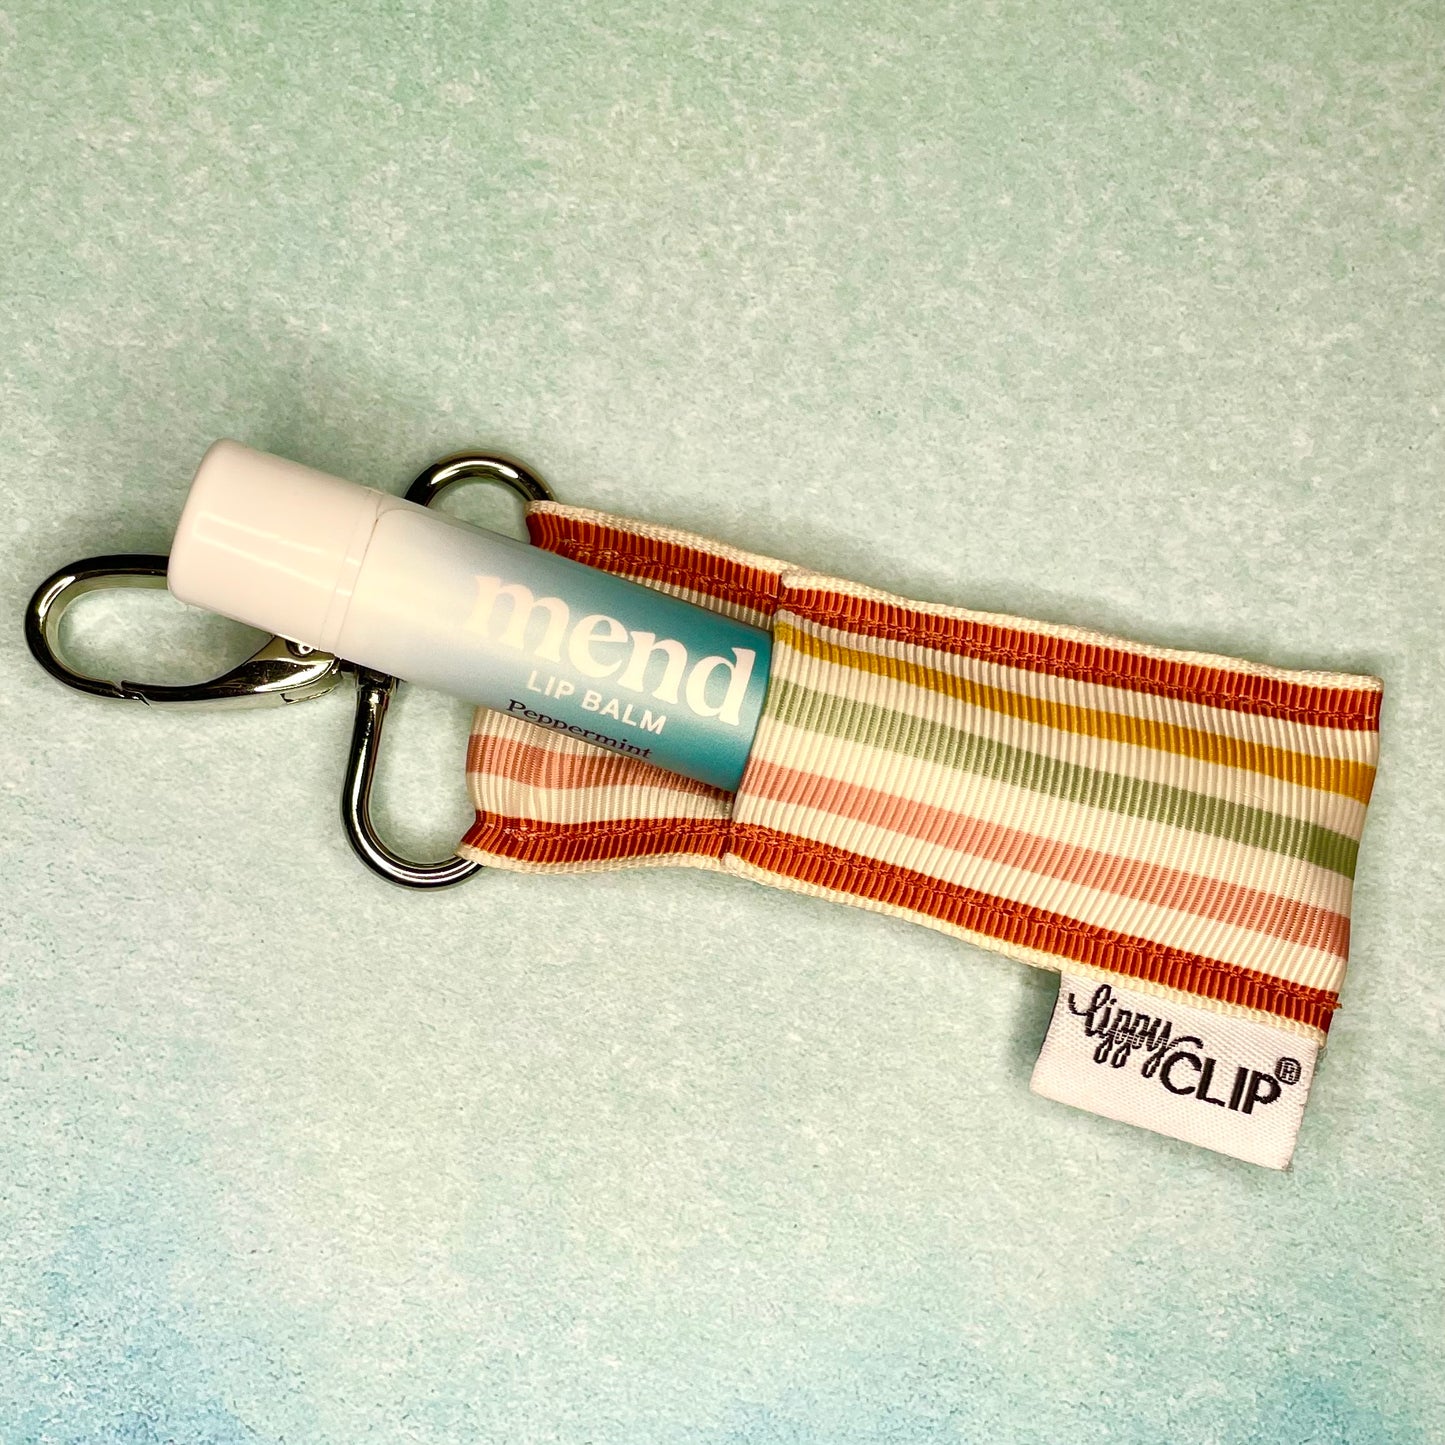 Mend Peppermint Lip Balm and a striped Lippy Clip lip balm holder featured in the spring 2024 Millions of Peaches Box